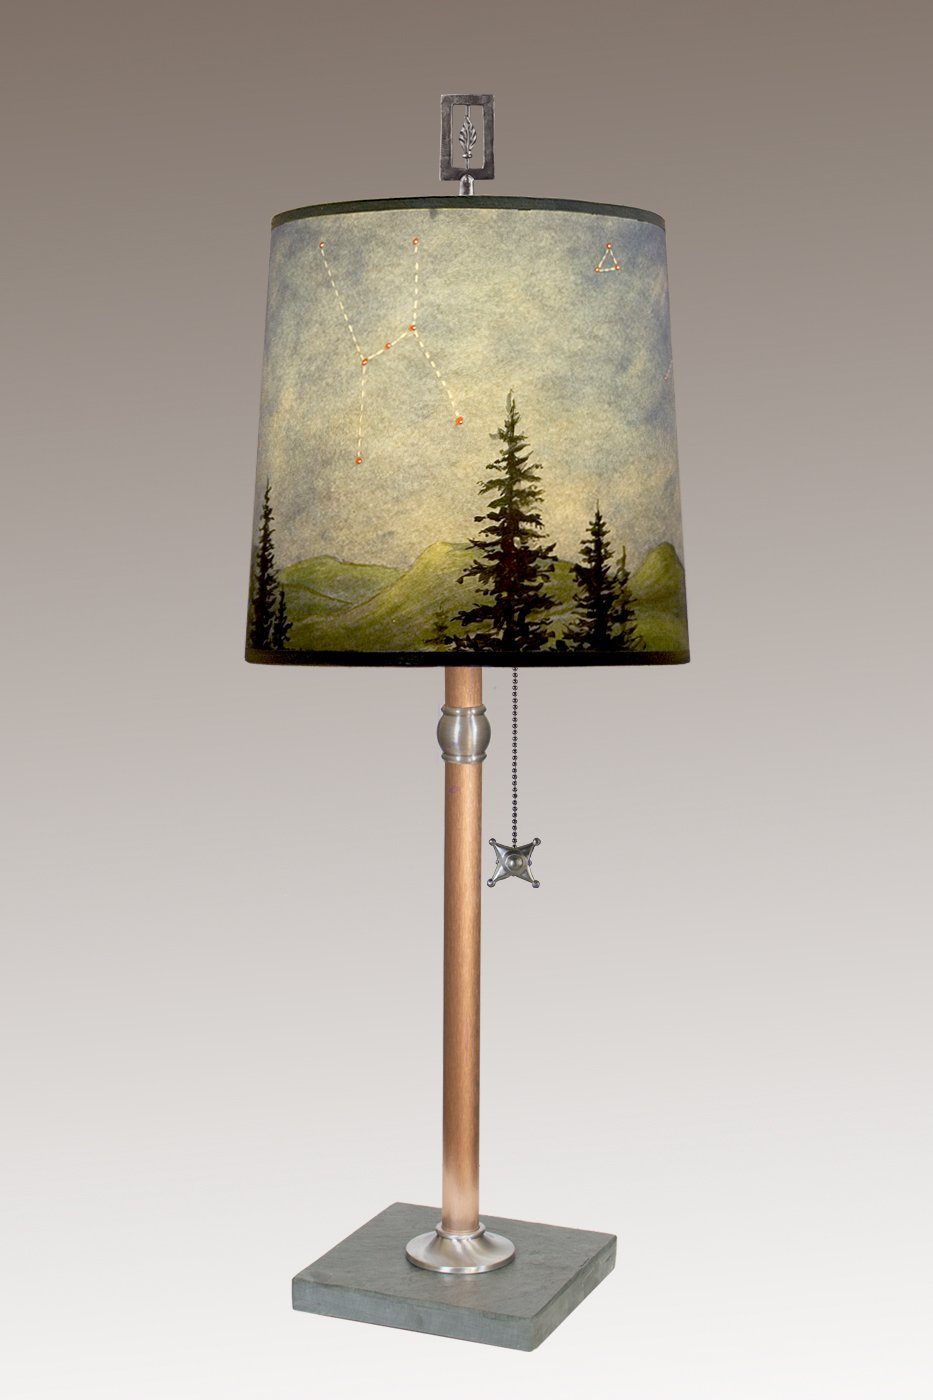 Copper Table Lamp with Medium Drum Shade in Midnight Sky